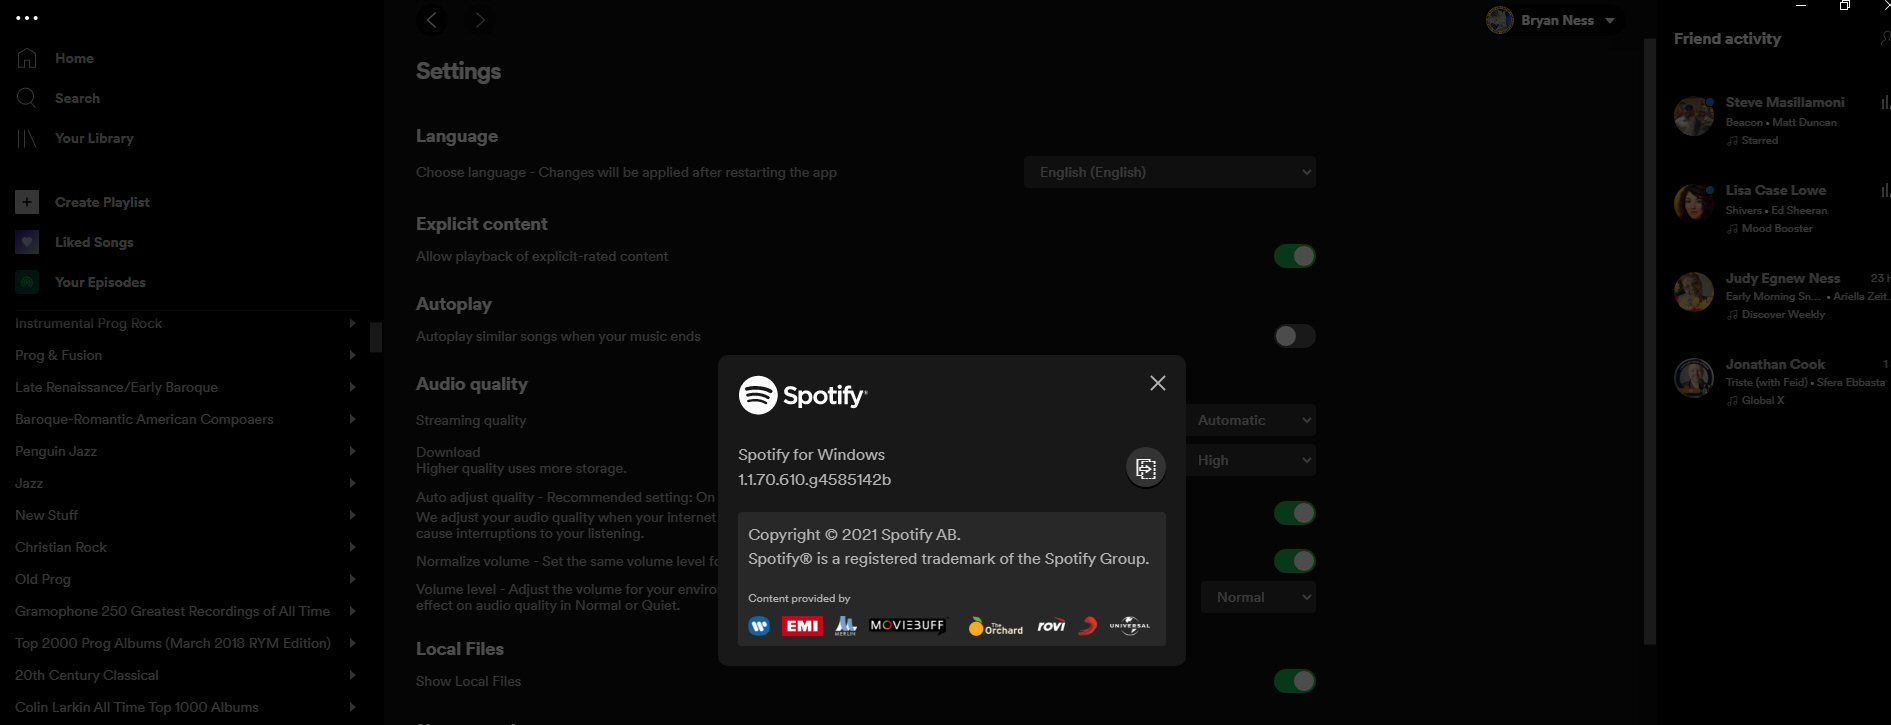 Solved: Connect - Autoplay DISABLED, but still ACTIVE - Page 3 - The  Spotify Community